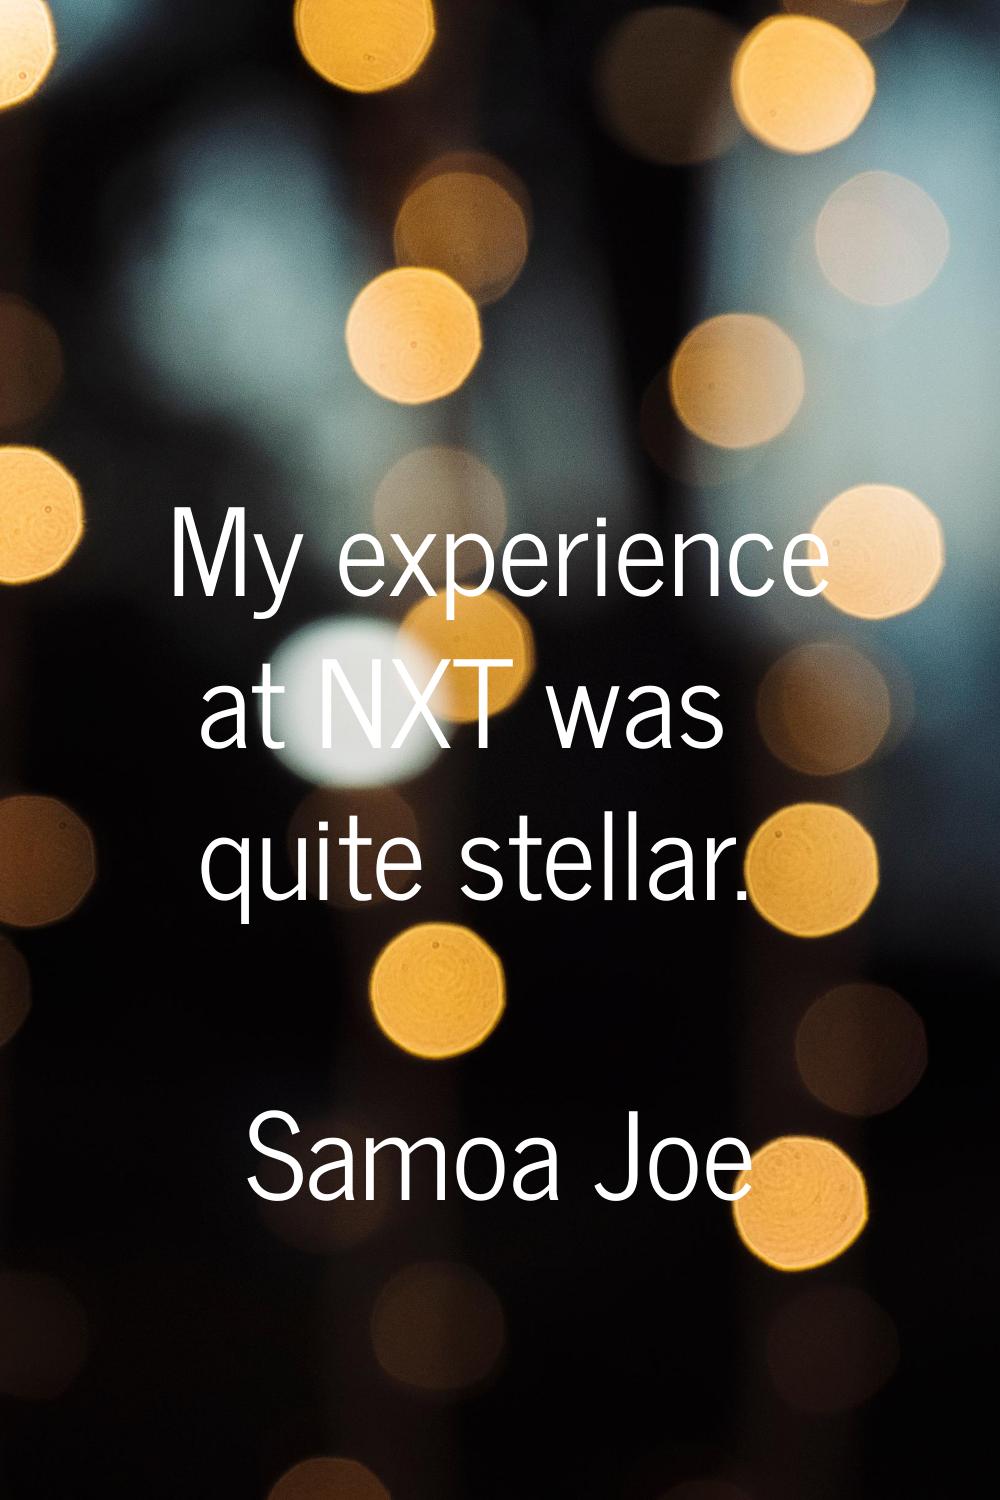 My experience at NXT was quite stellar.